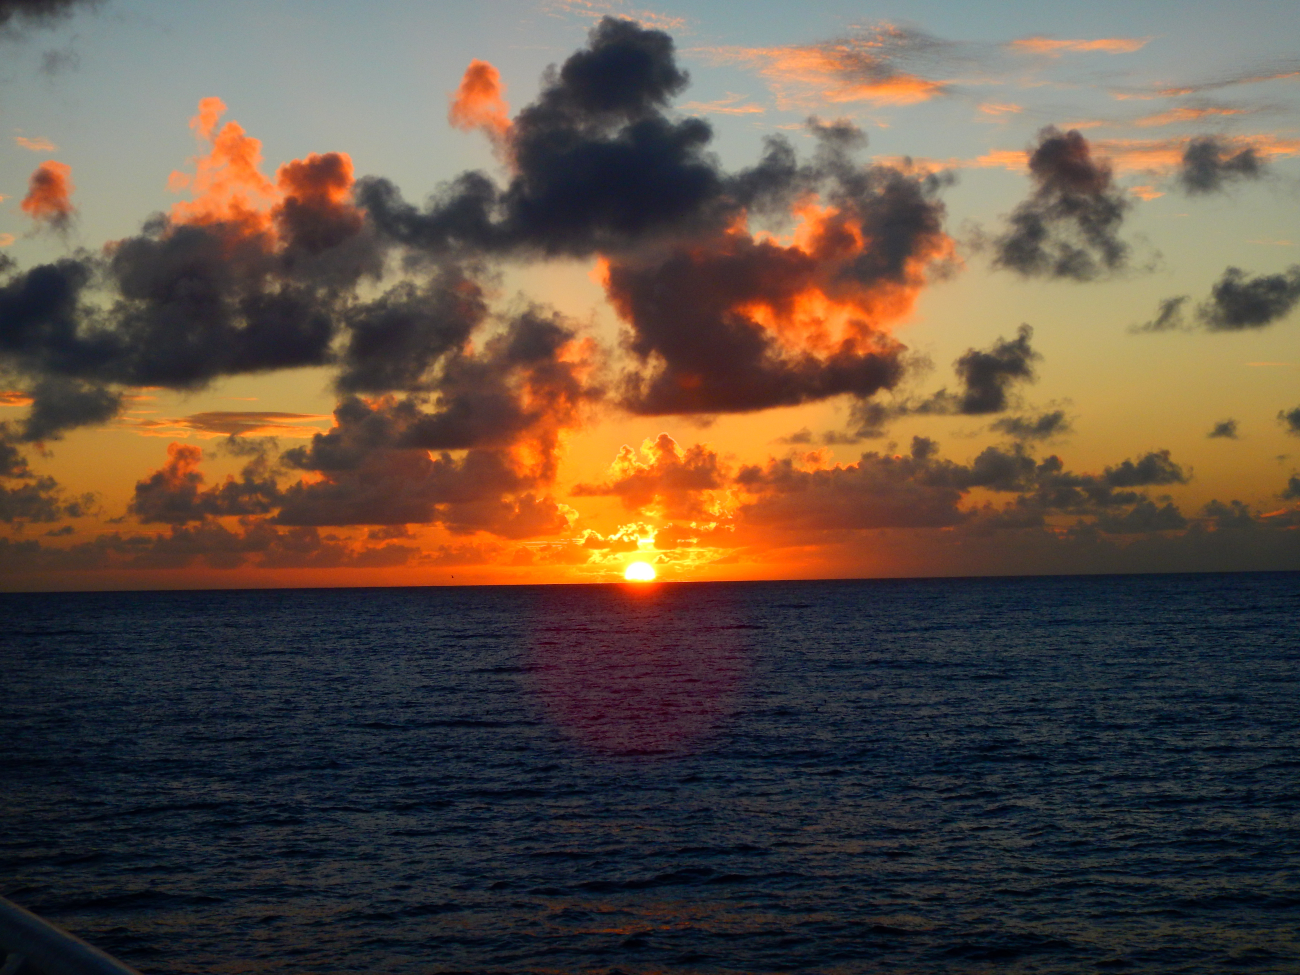 Sunset somewhere in the Commonwealth of the Northern Mariana Islands